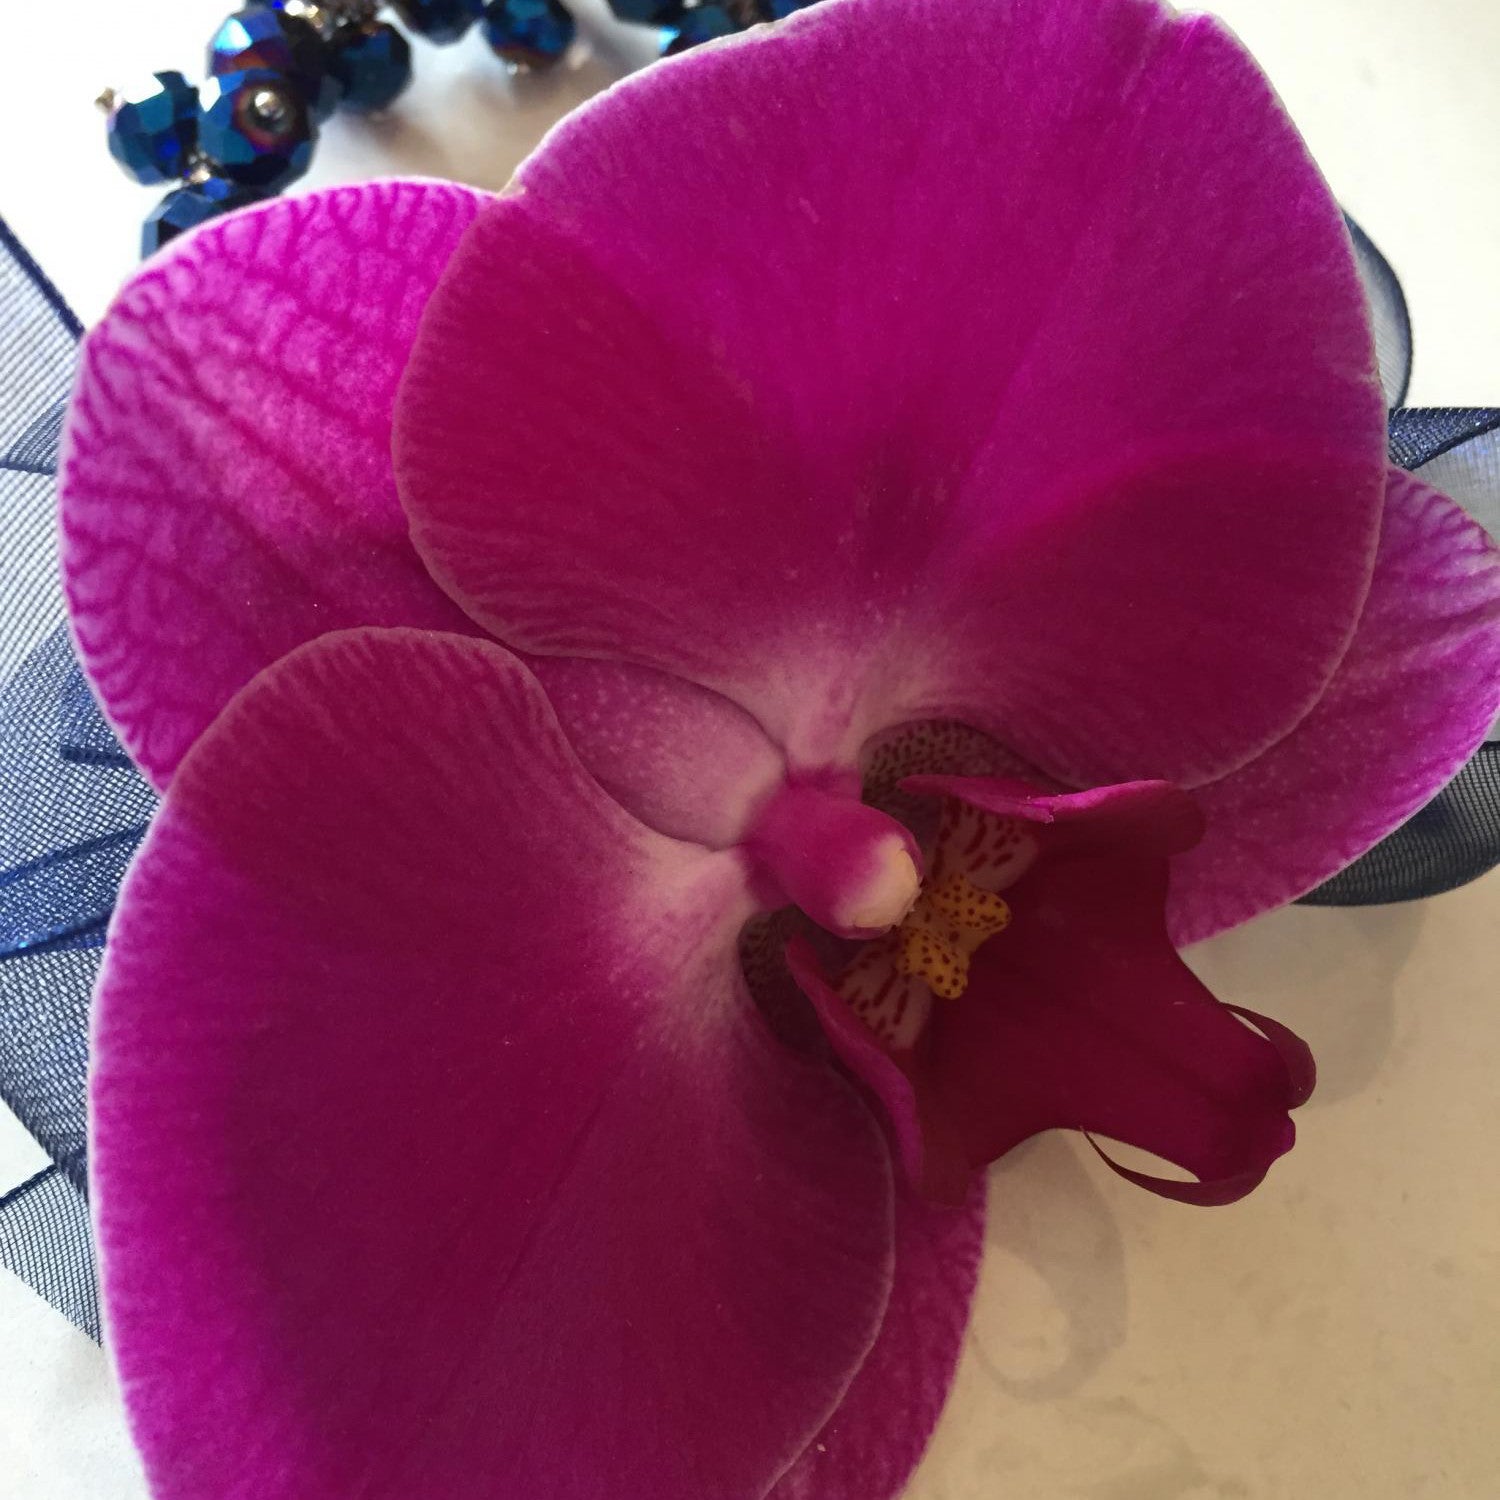 Orchid Corsage & Matching Boutonniere